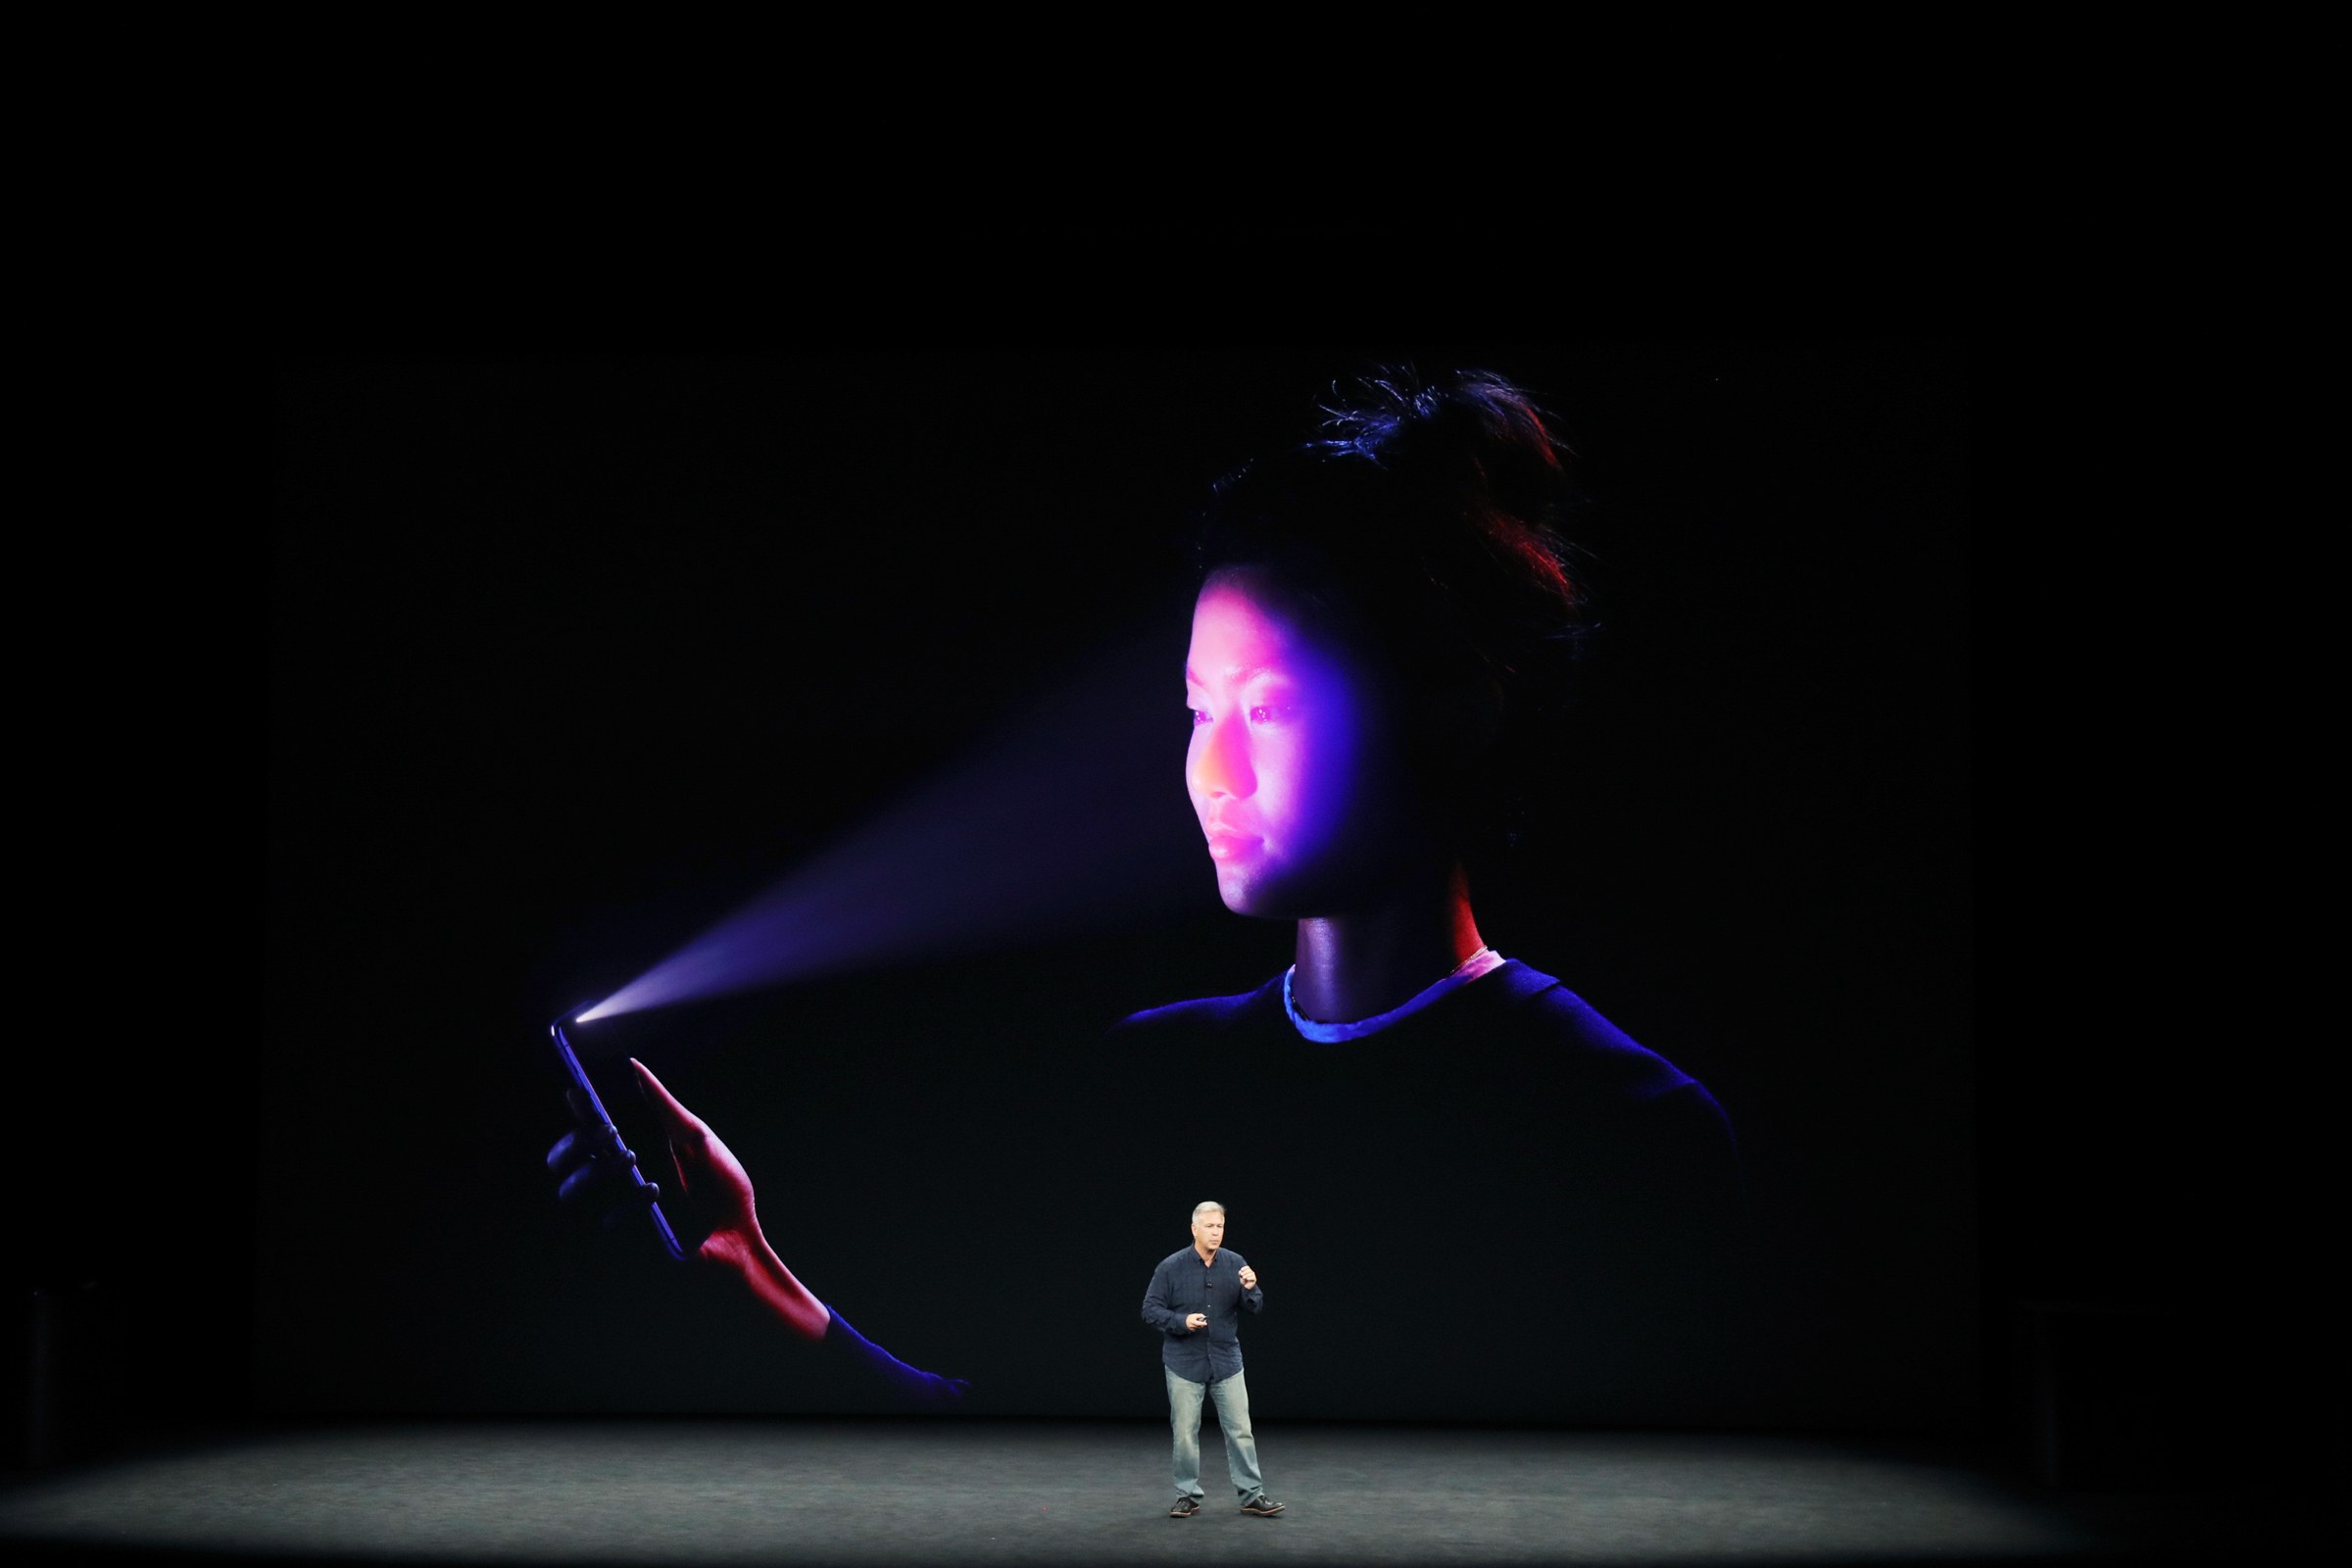  iPhone X Released with Face ID